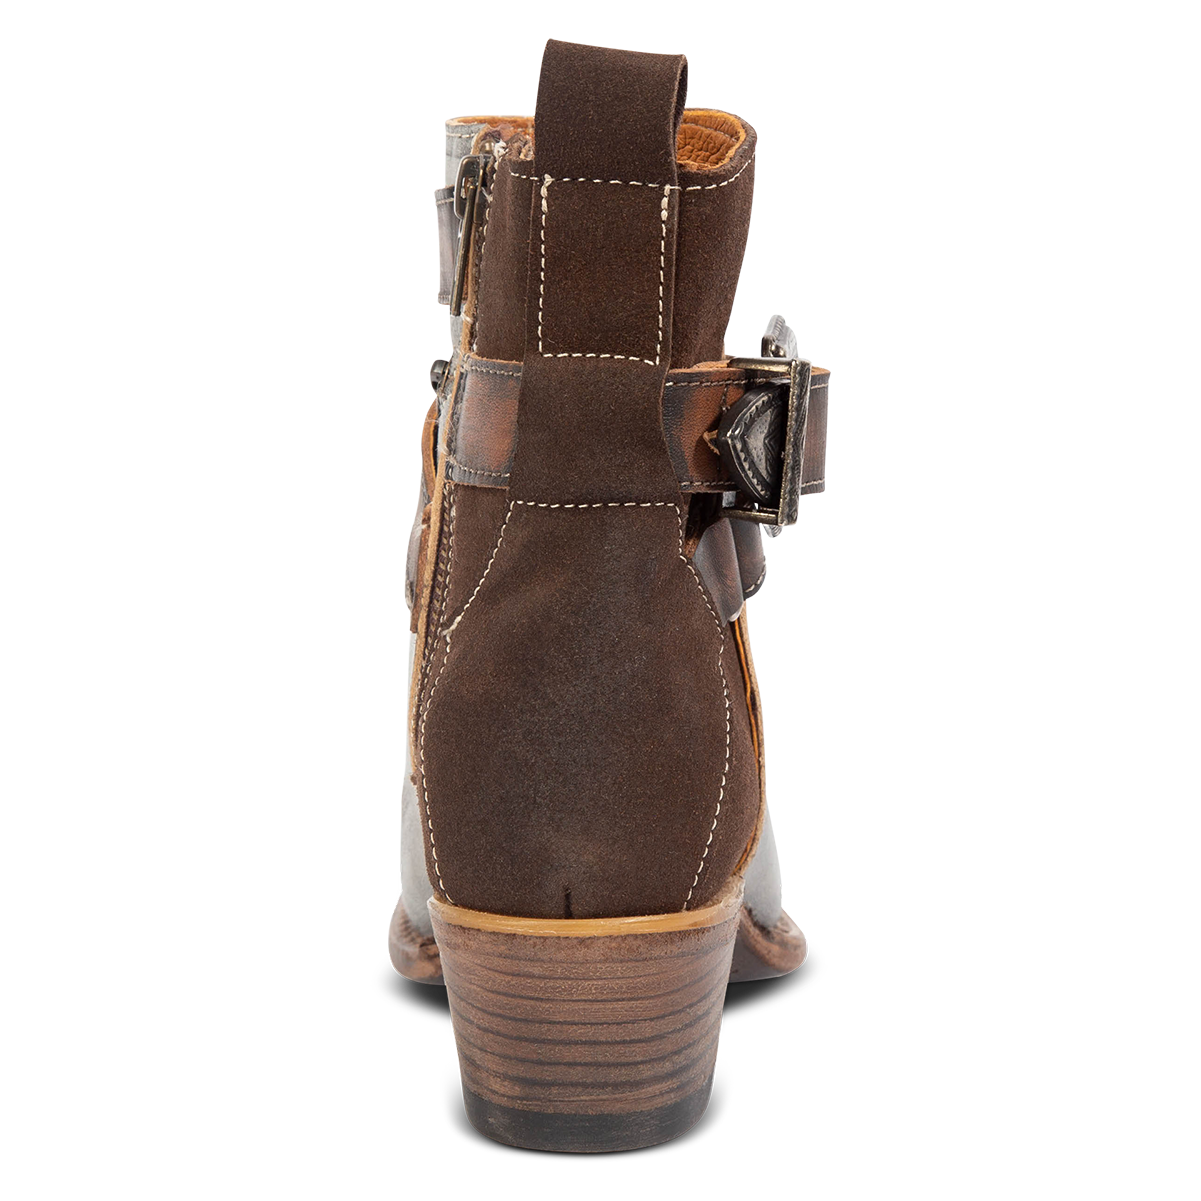 Back view showing low heel and pull strap on FREEBIRD women's Whip ice multi leather western ankle bootie